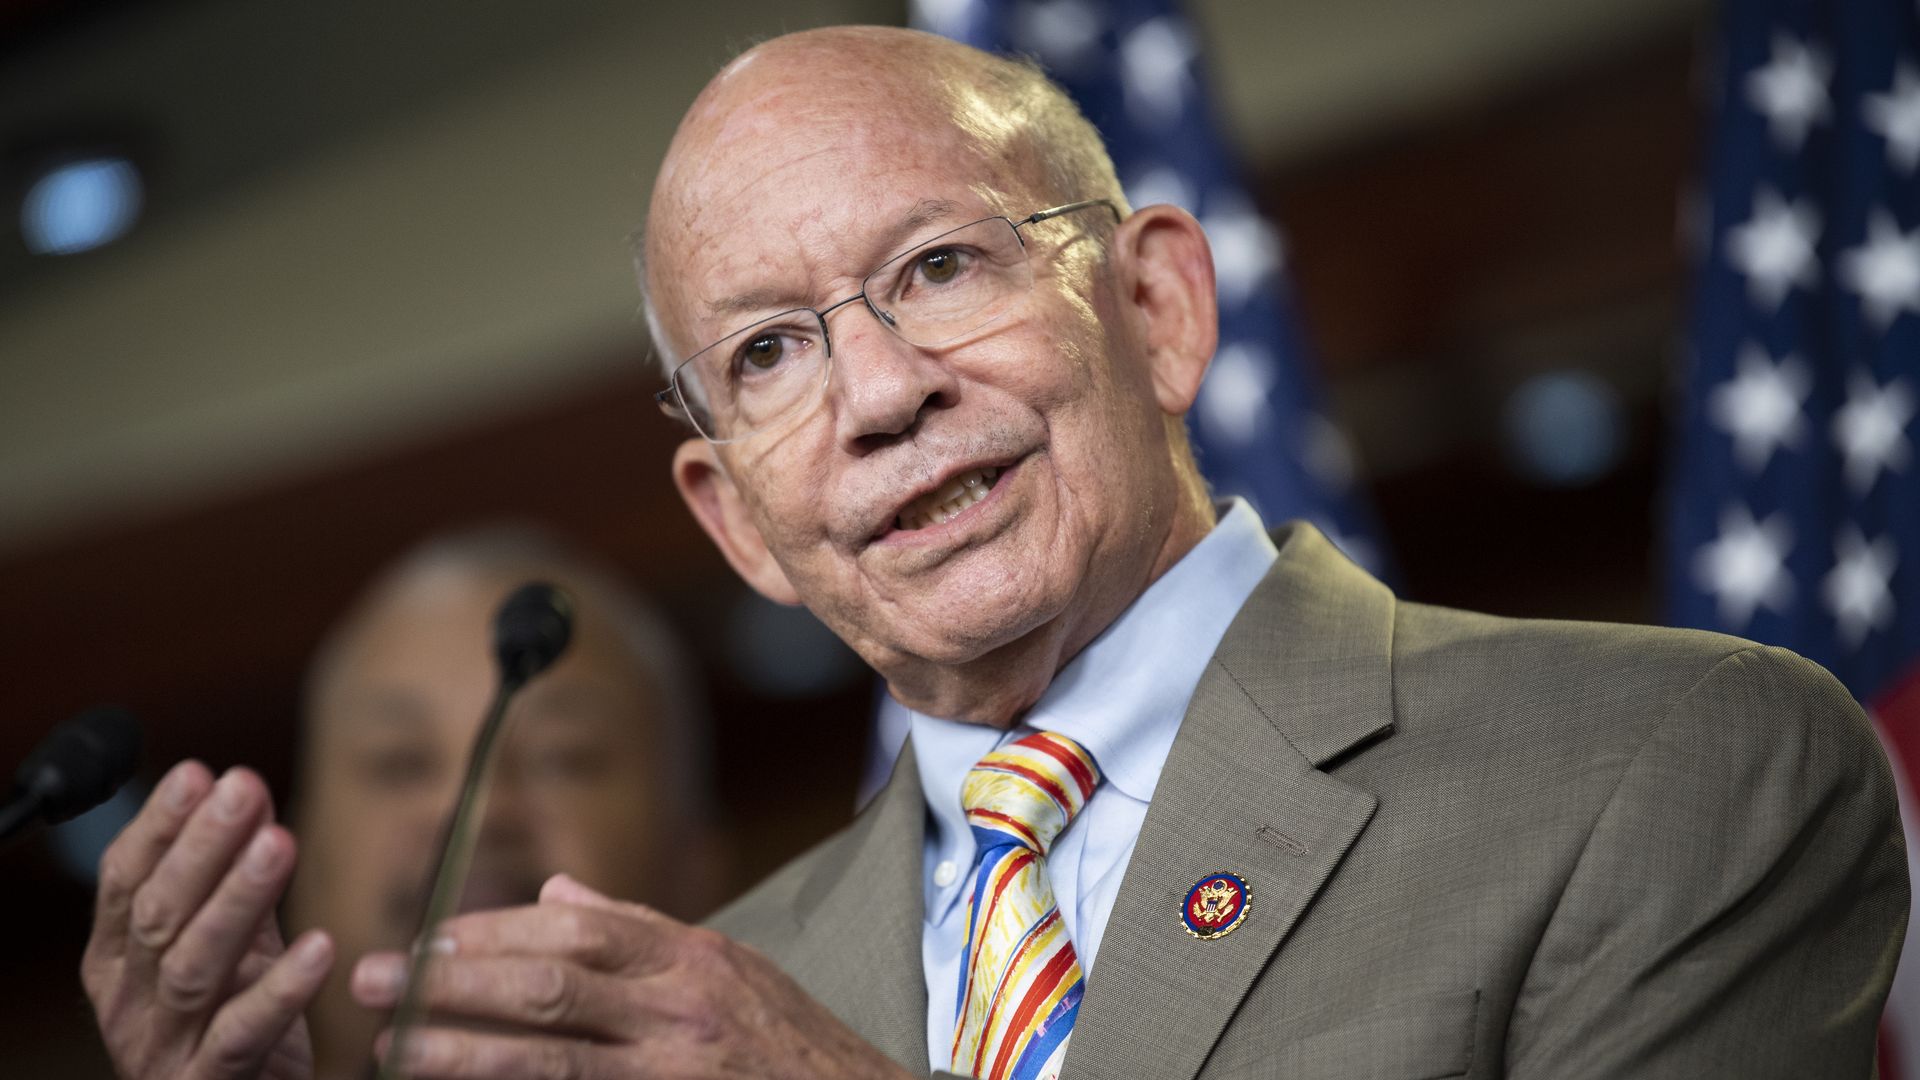 Rep. Peter DeFazio is seen speaking during a news conference.